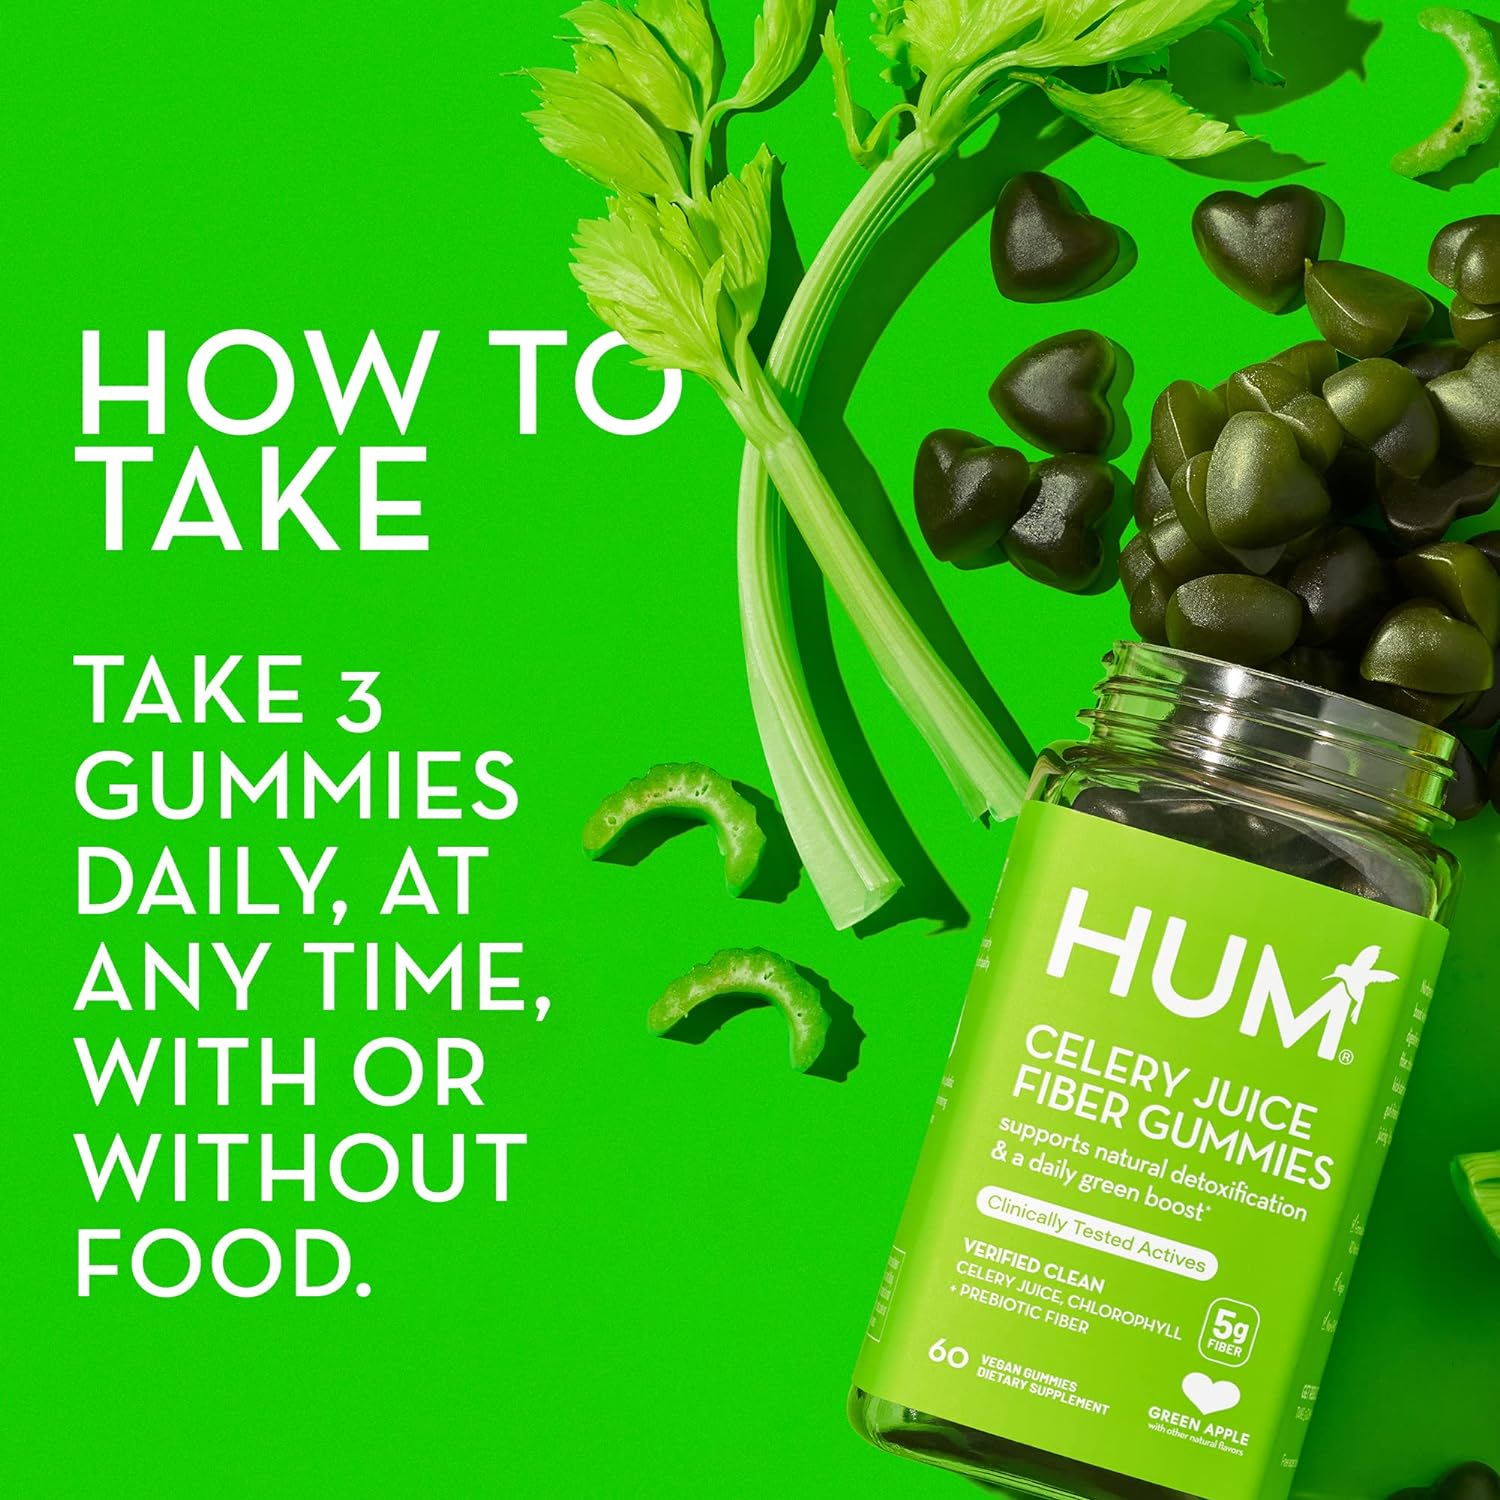 HUM Celery Juice Fiber Gummies The First Prebiotic Celery Juice Gummy, Supports Detoxification and A Daily Green Boost with Celery Juice, Chlorophyll, and Prebiotic Fiber(60 Count) : Health & Household